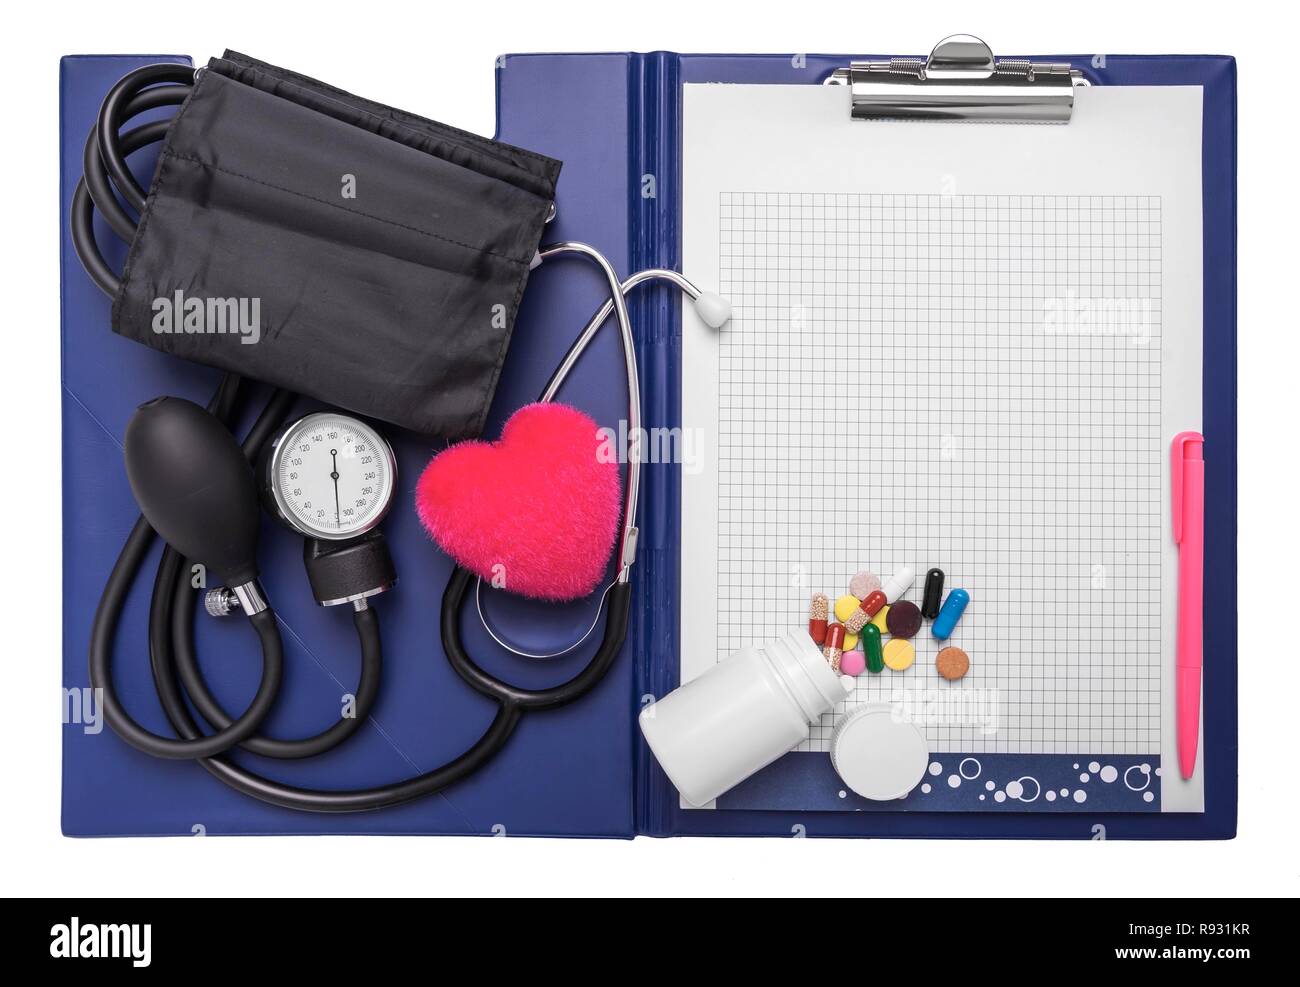 Treatment of heart disease. An apparatus for measuring pressure. Stock Photo